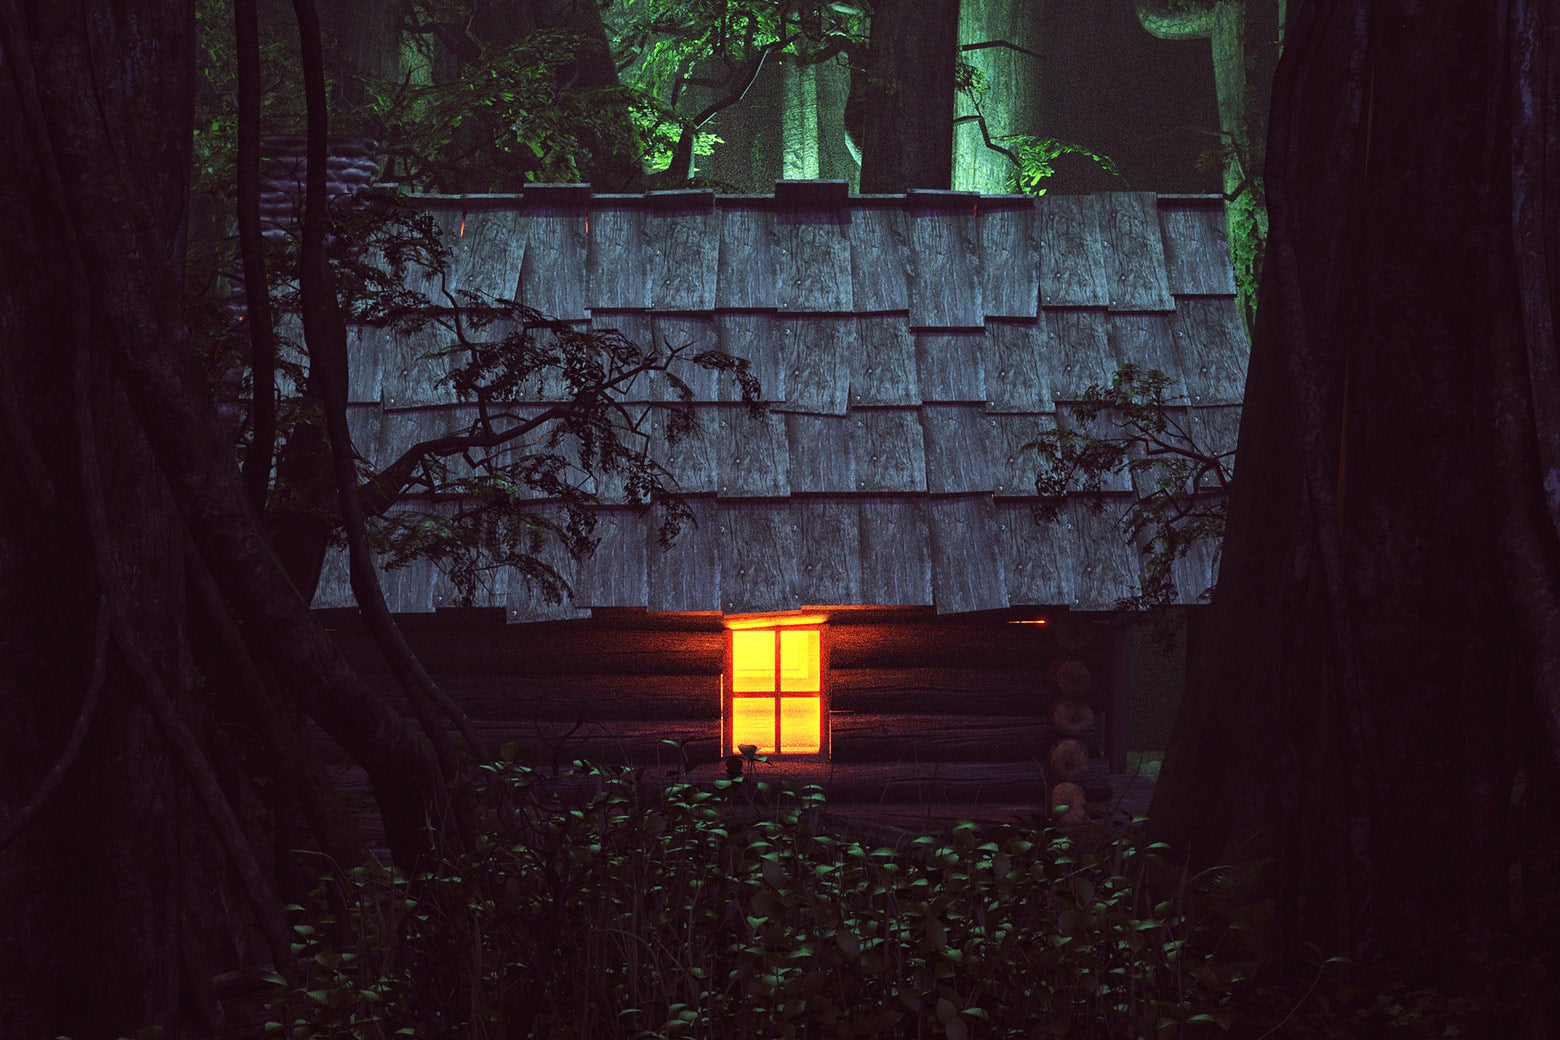 A house in the woods with a single light on.